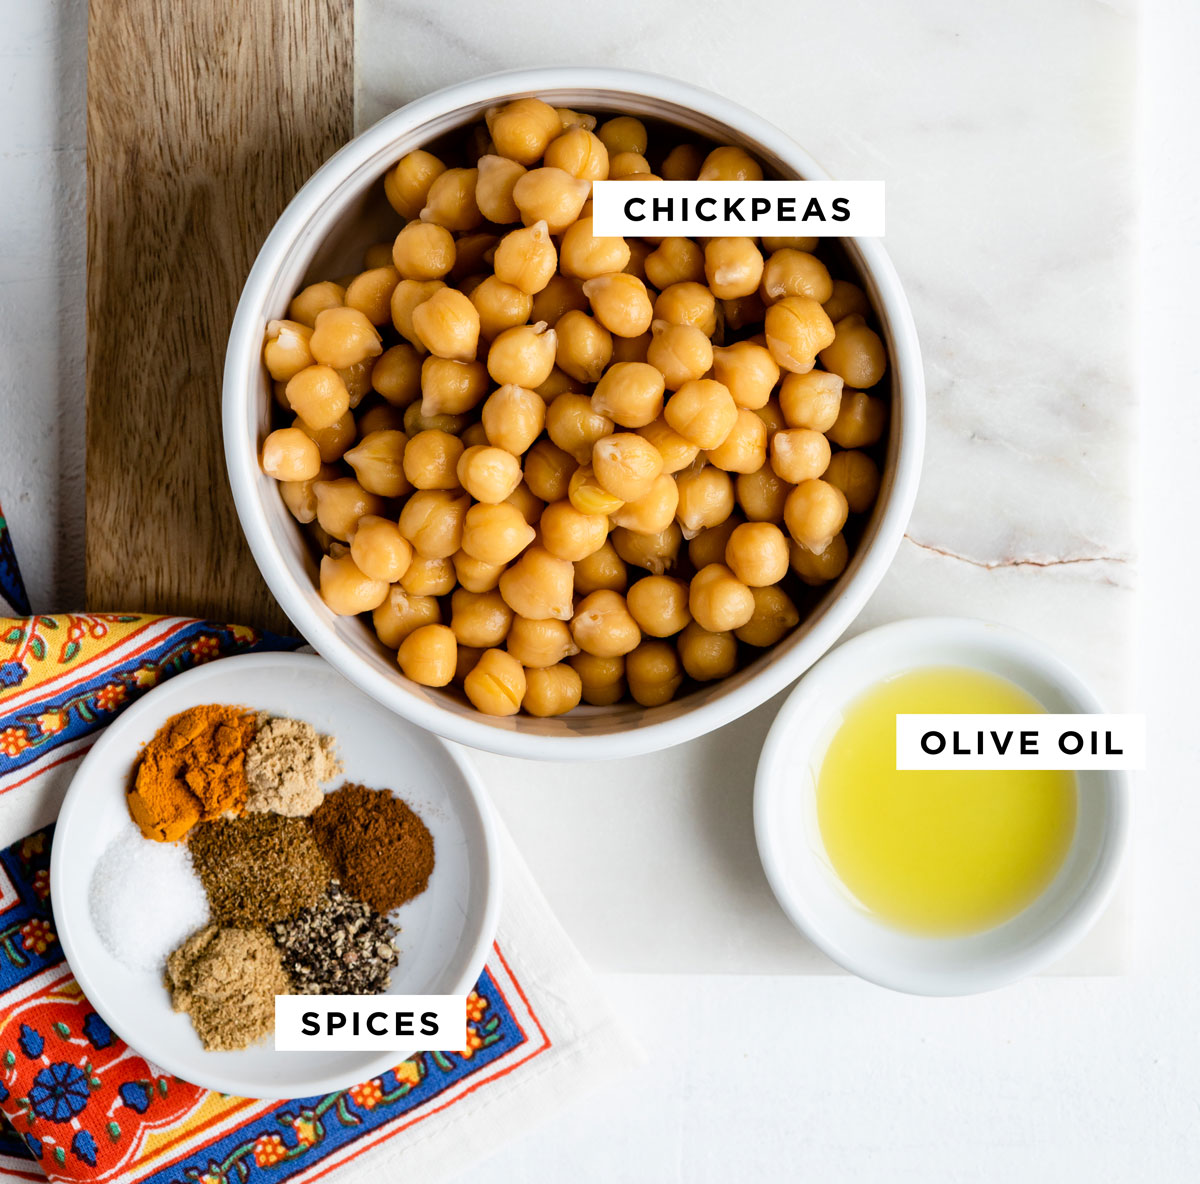 labeled ingredients for a snack including chickpeas, olive oil and spices.